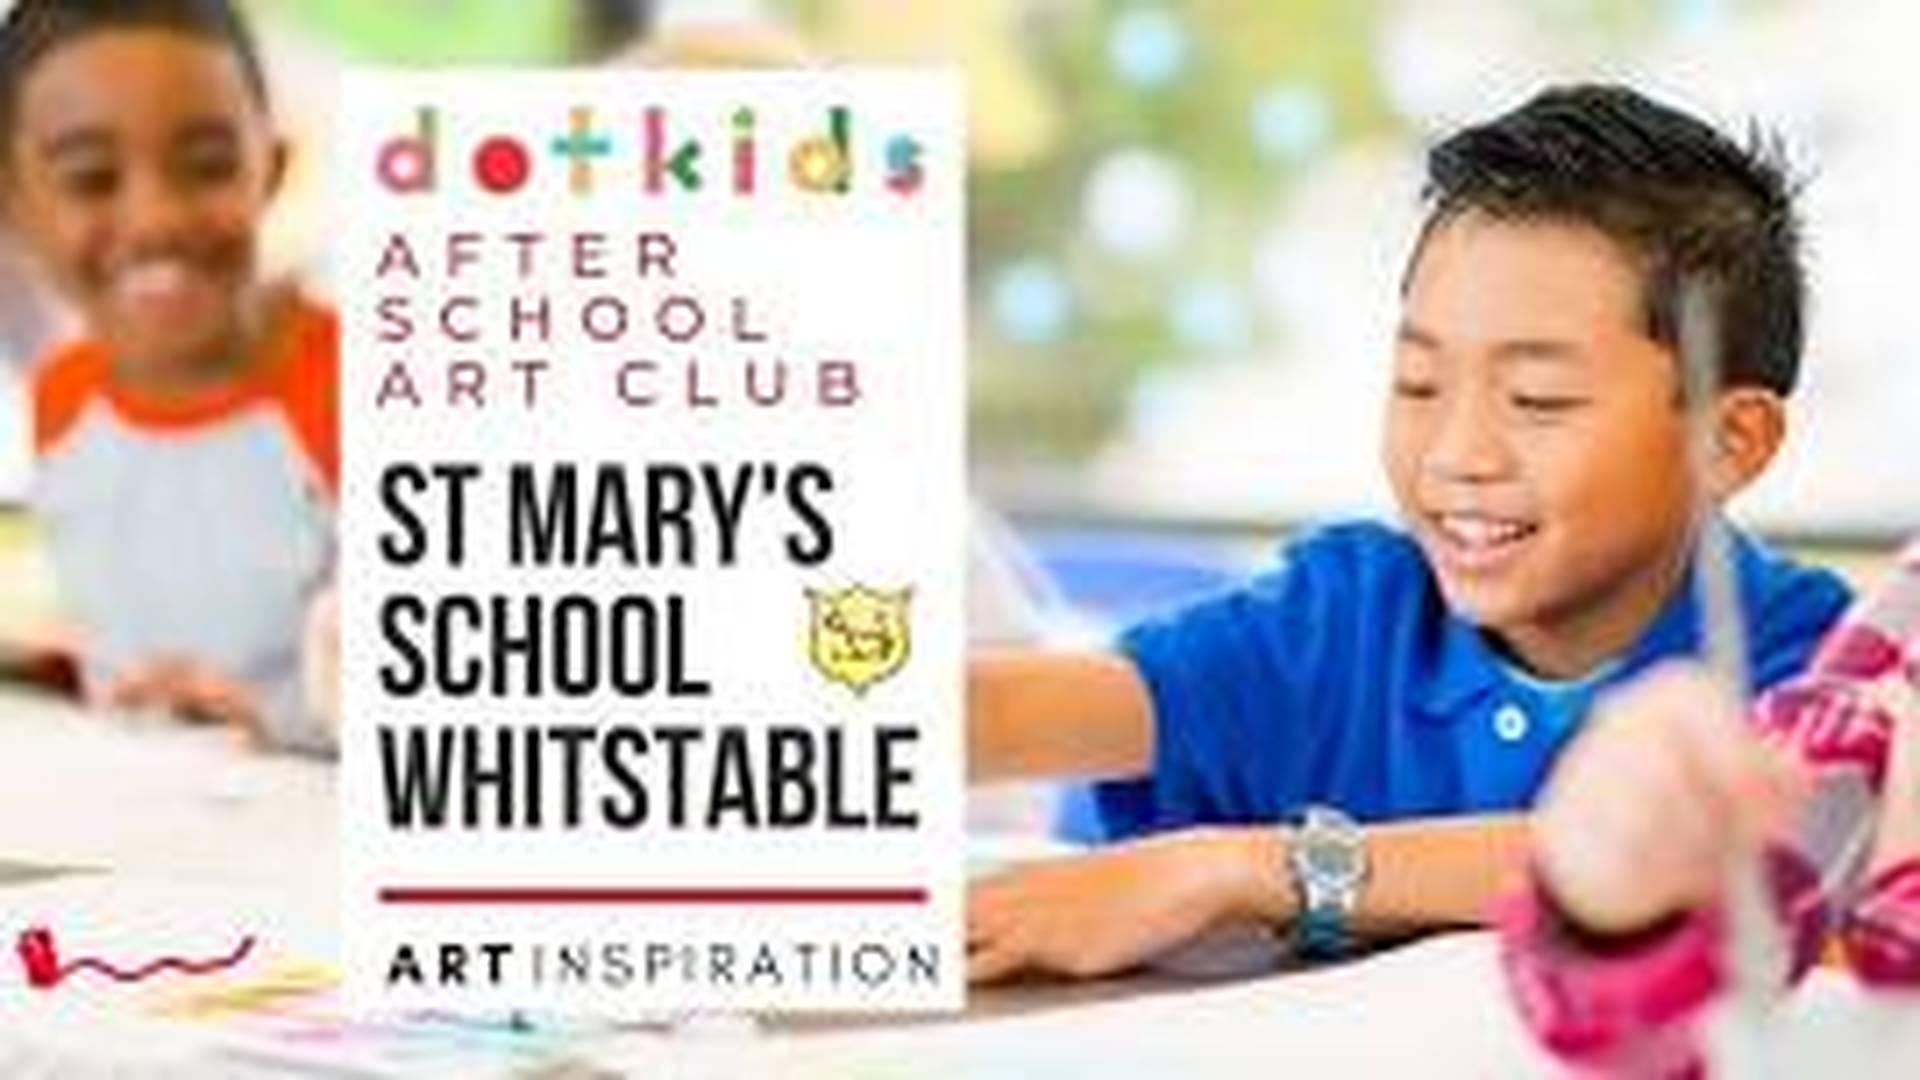 Dot Kids Art Club At St Mary's Primary School, Whitstable photo